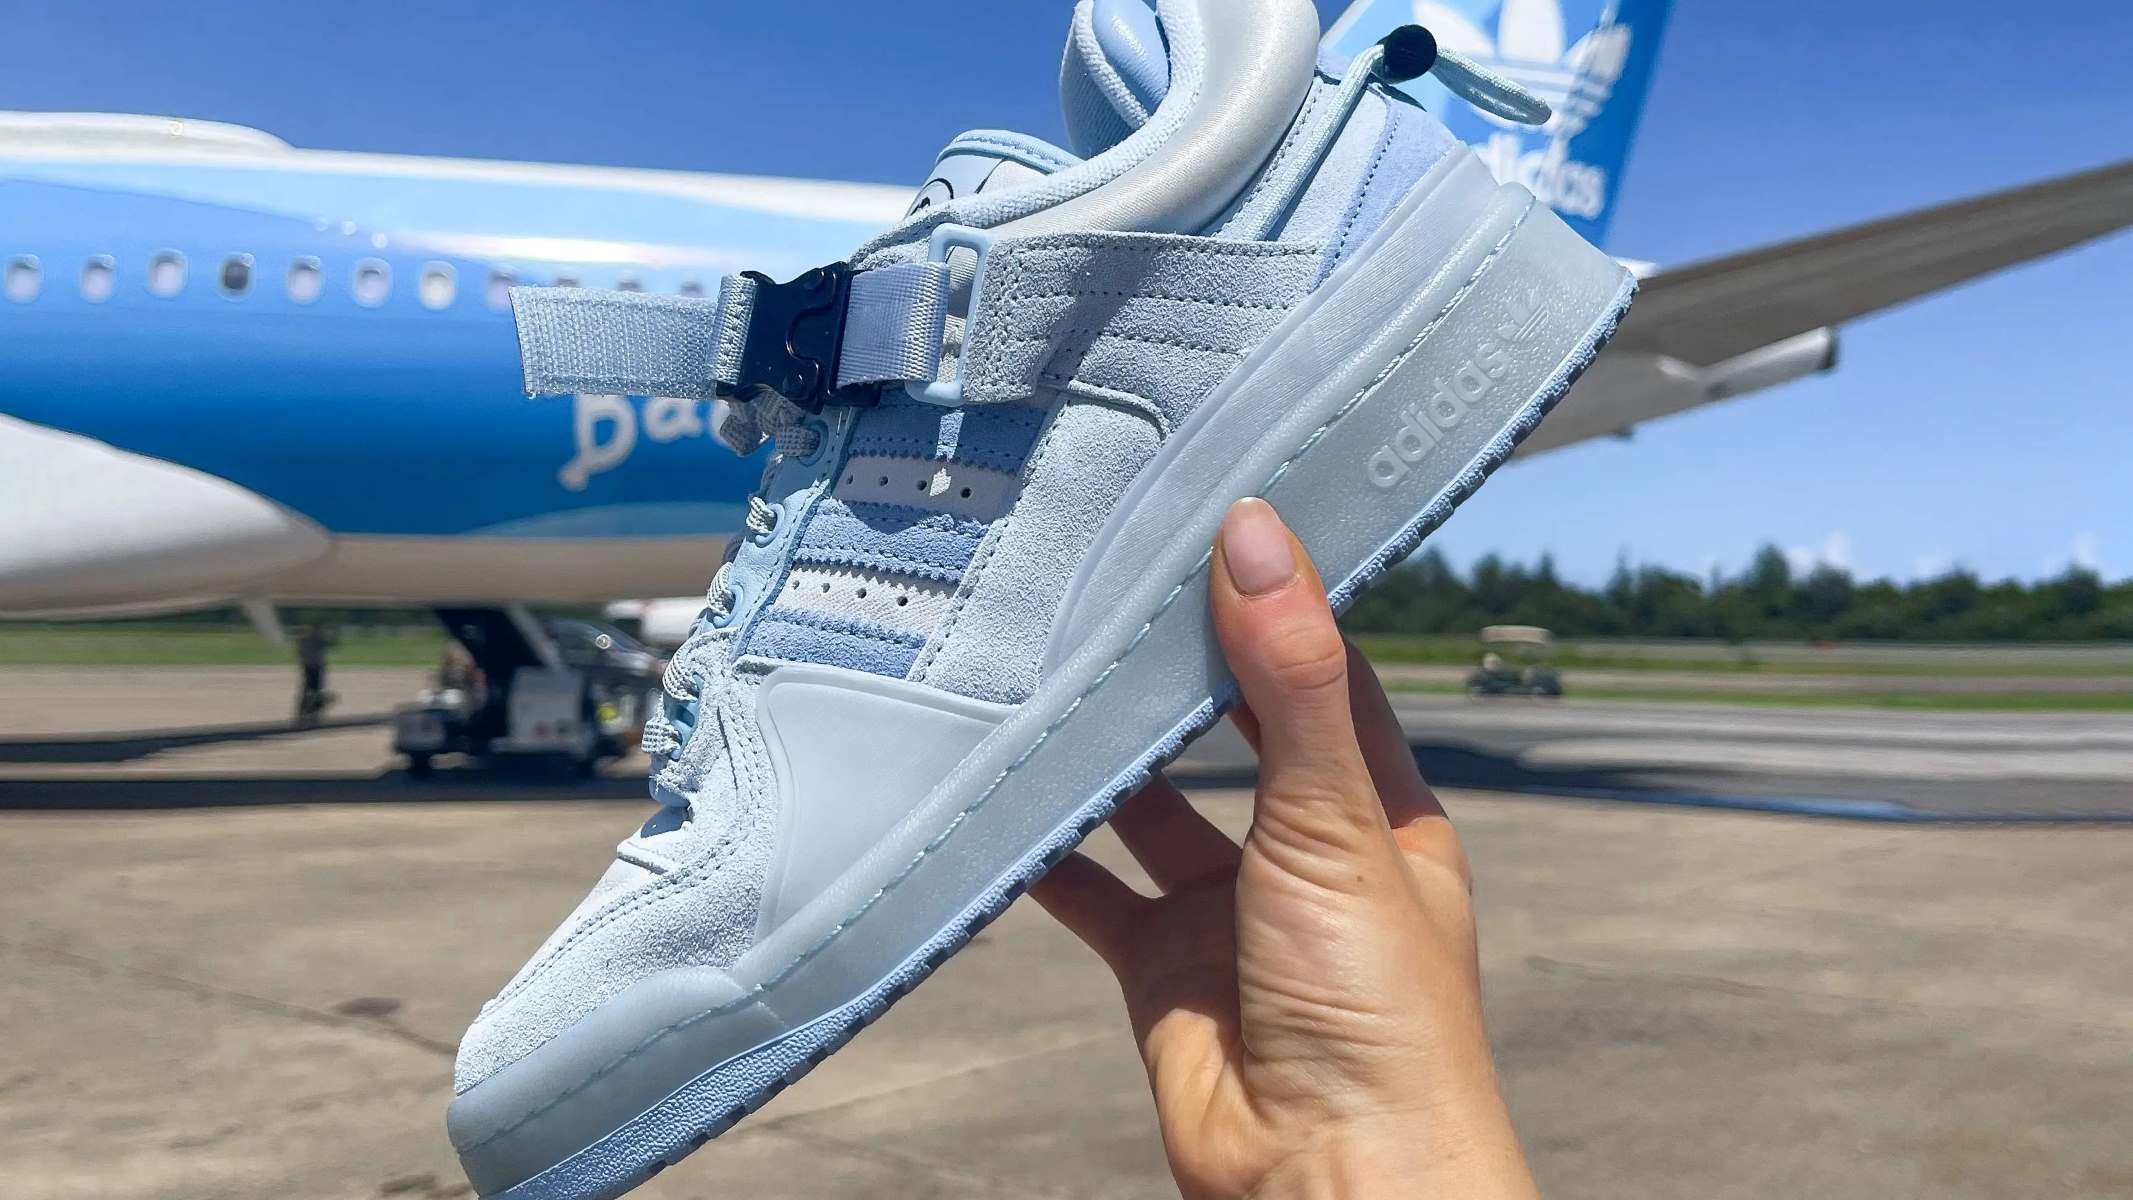 Bad Bunny’s New Sneakers: Will They Fly Off The Shelves?